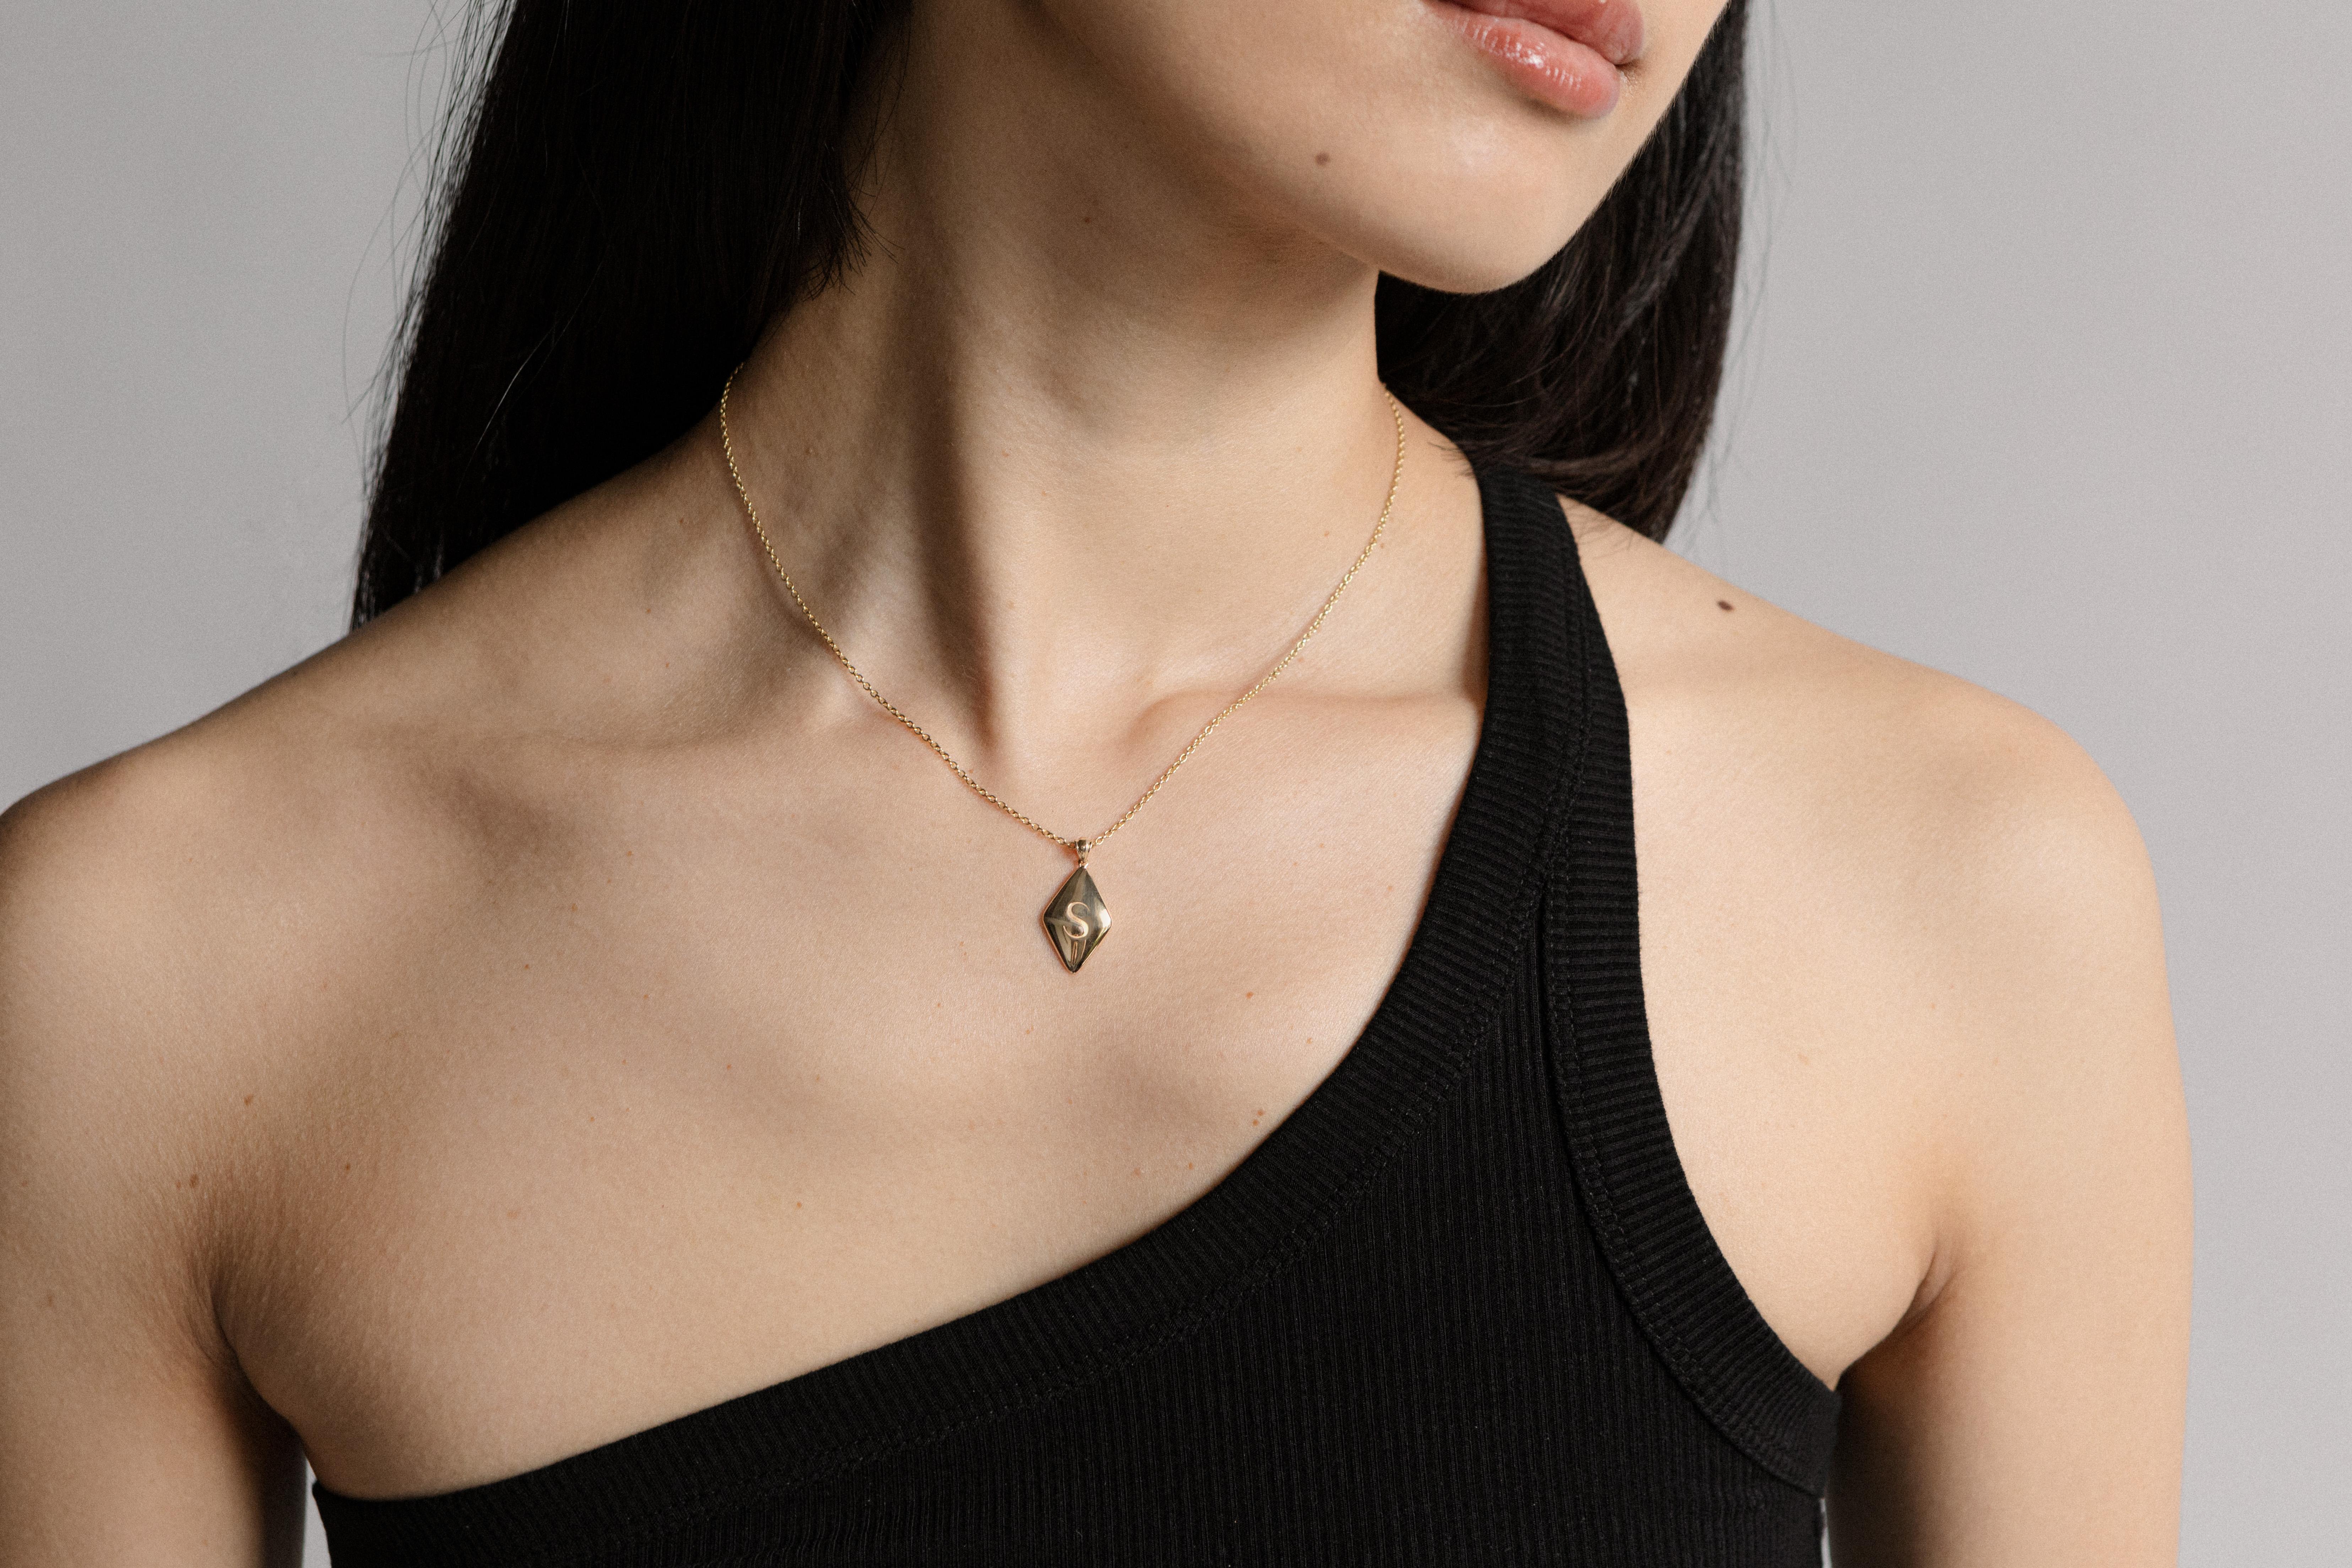 The line between exaggeration and expression is drawn by subtlety.  
Designed to represent a piece of sentimentality in your daily life, the Kite Pendant has a unique yet simple shape with a custom font to match. Enjoy the design on its own, or